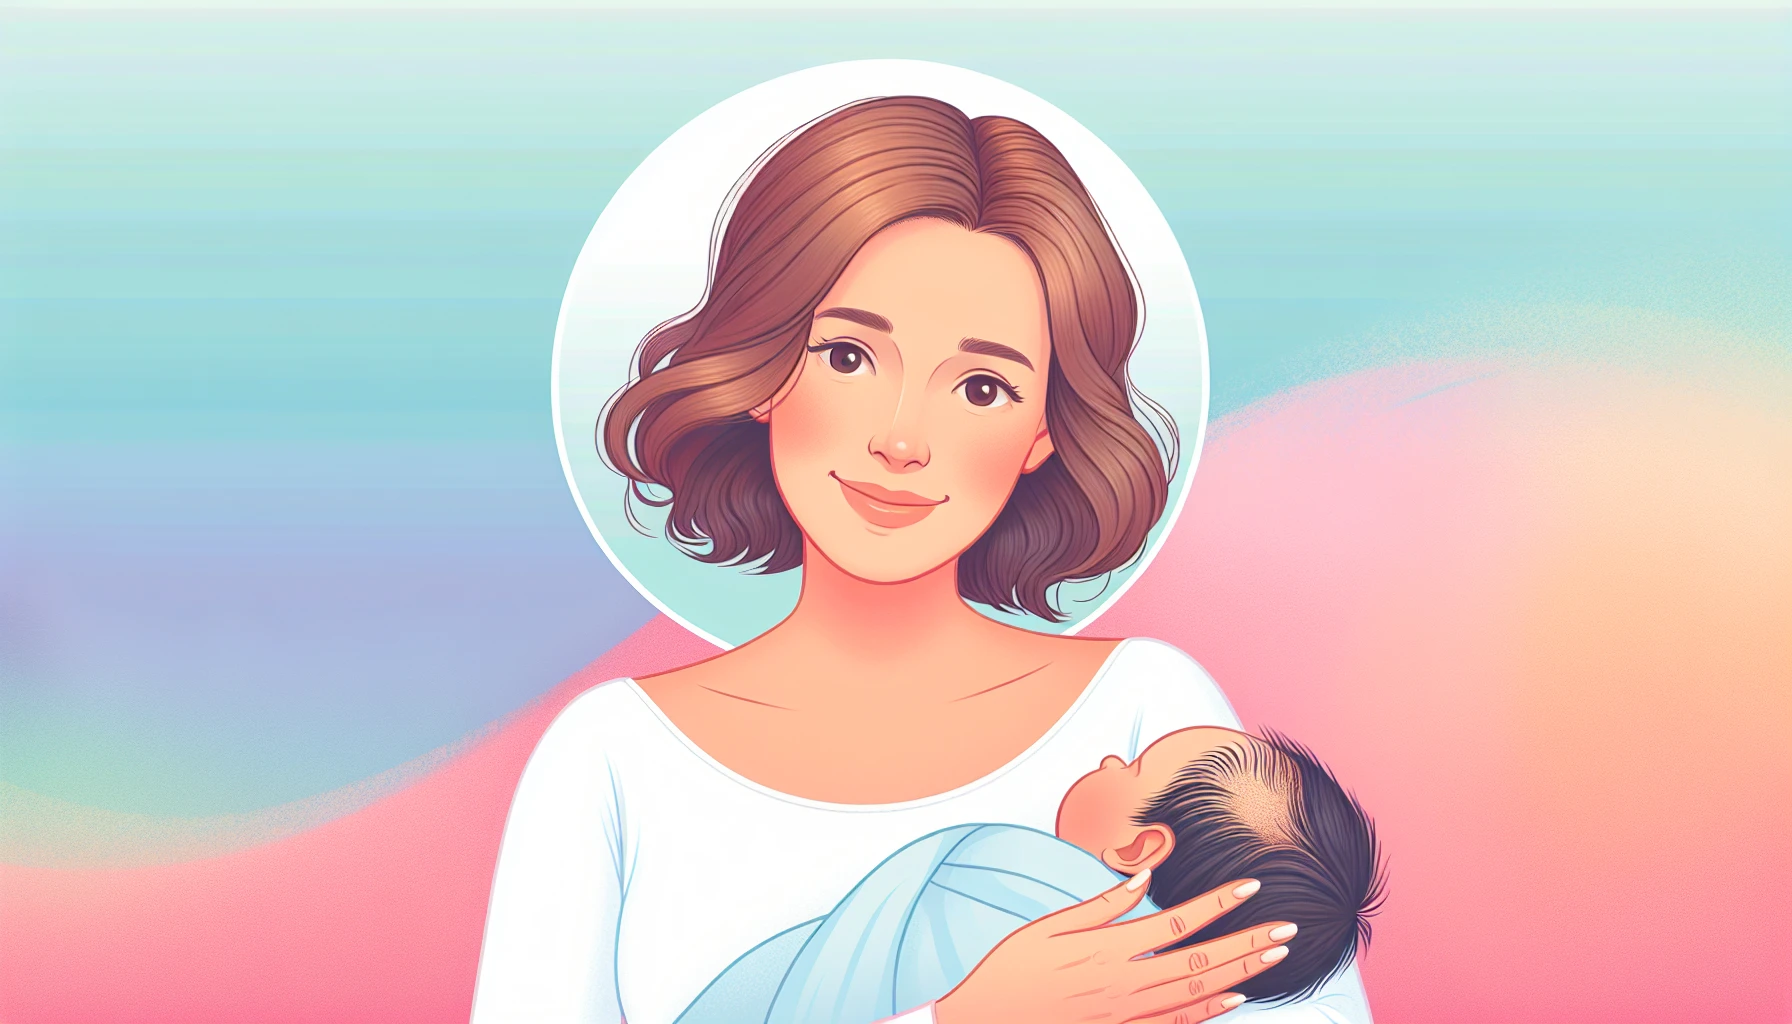 Illustration of a woman experiencing postpartum hair loss